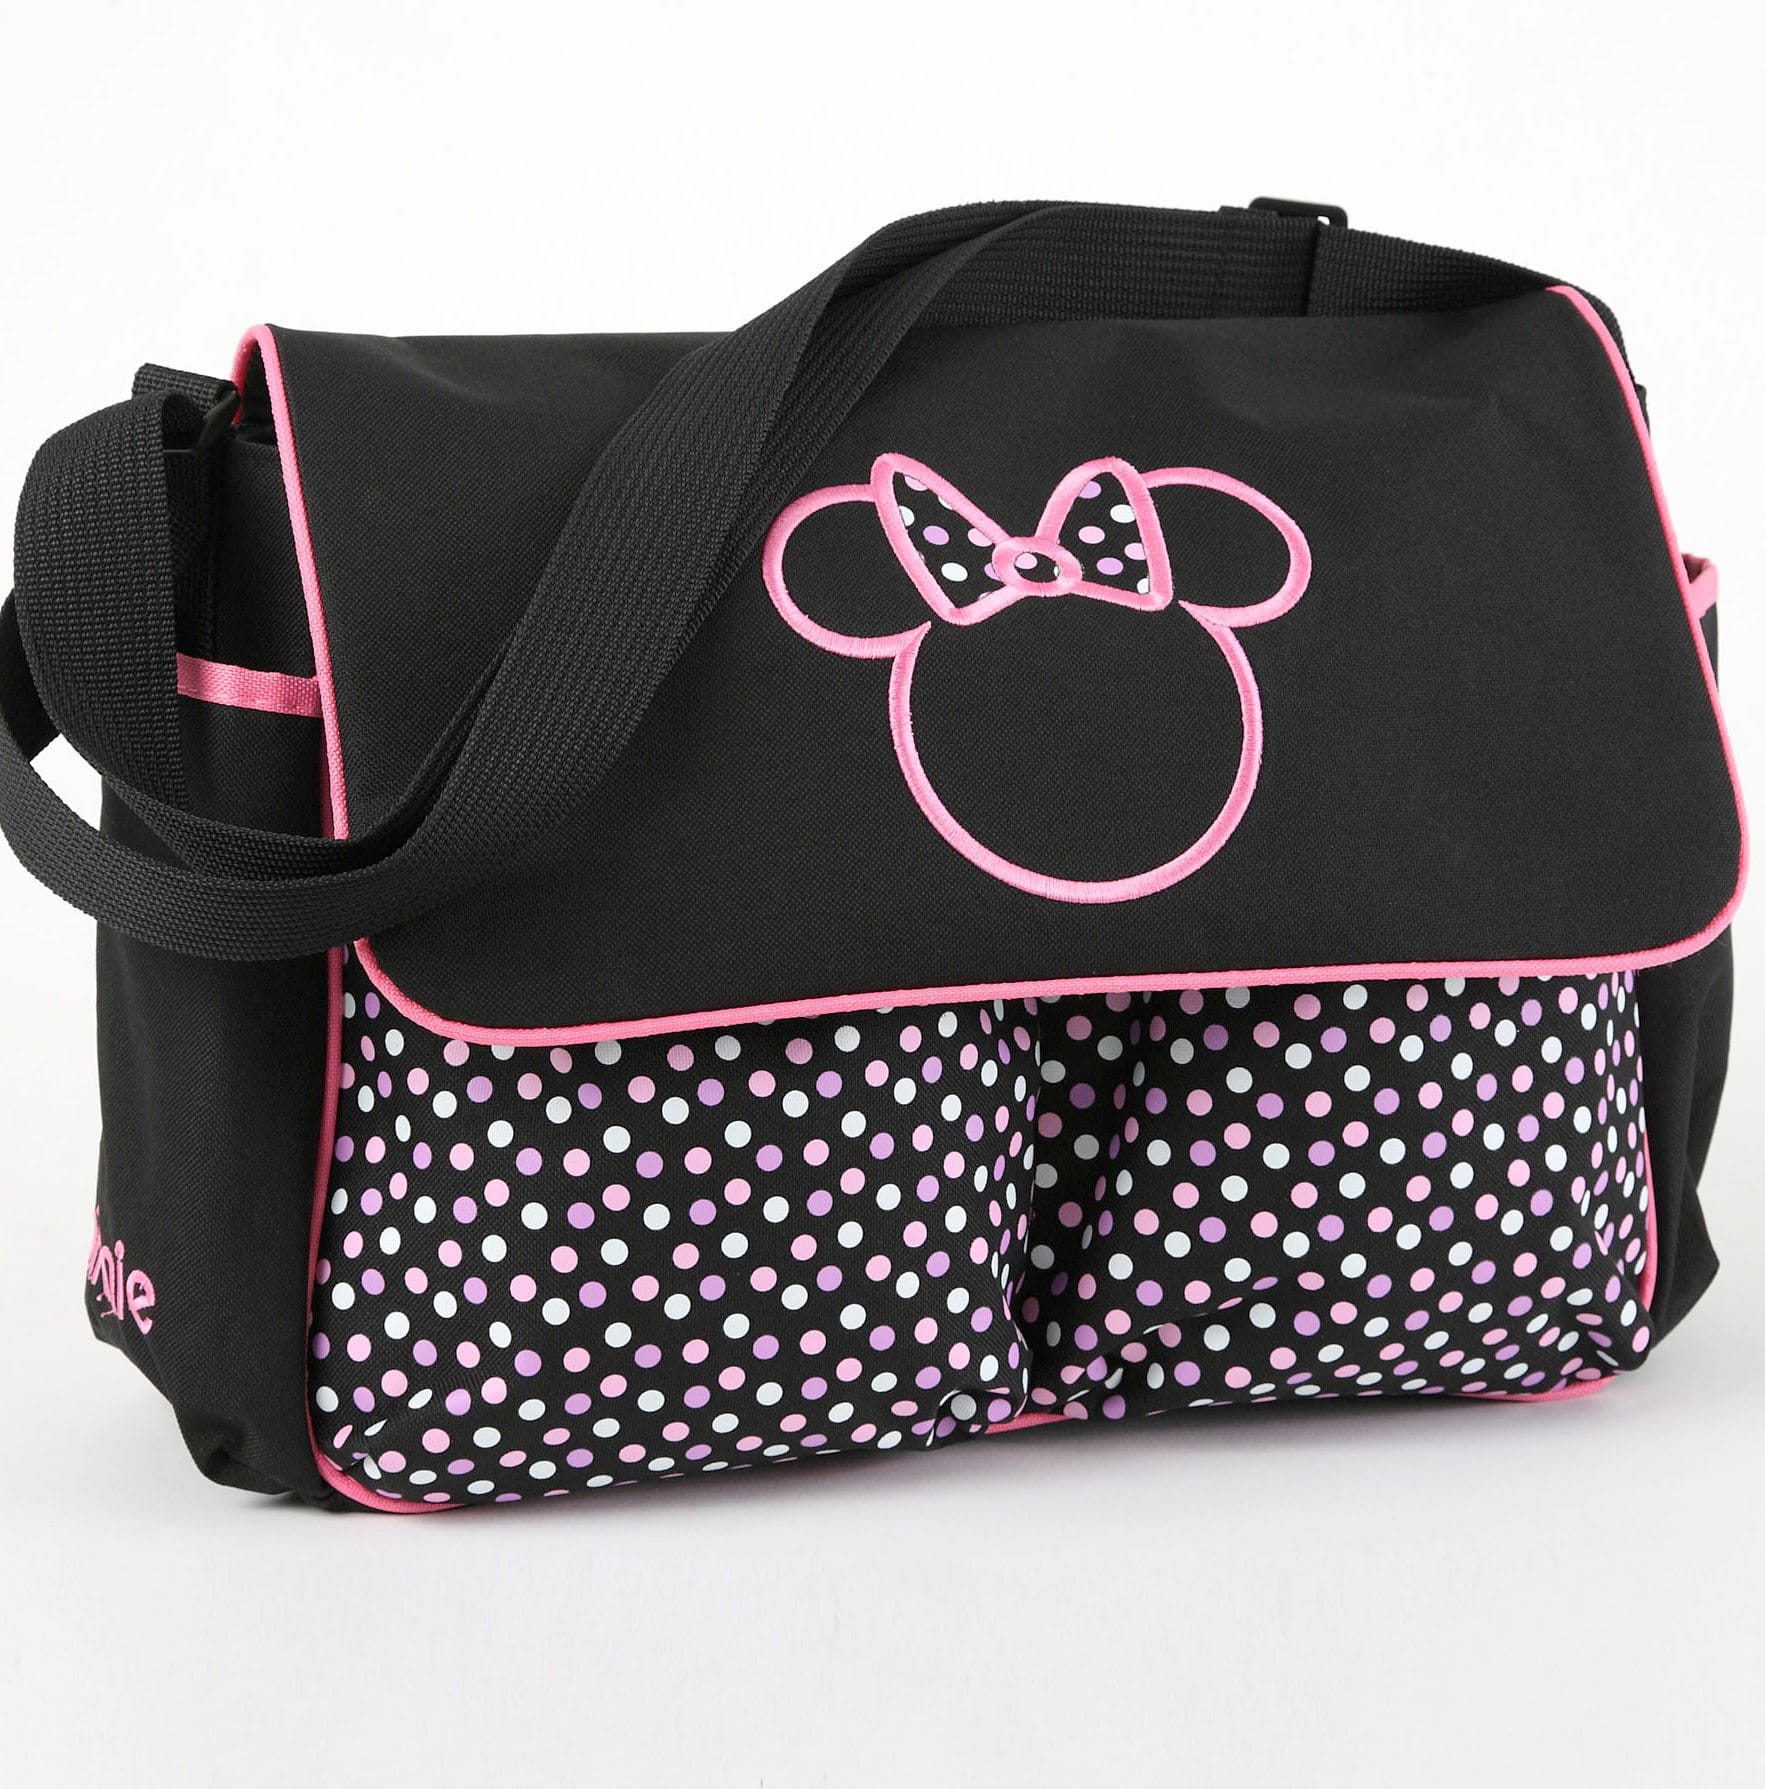 Free Minnie Mouse Bag Picture